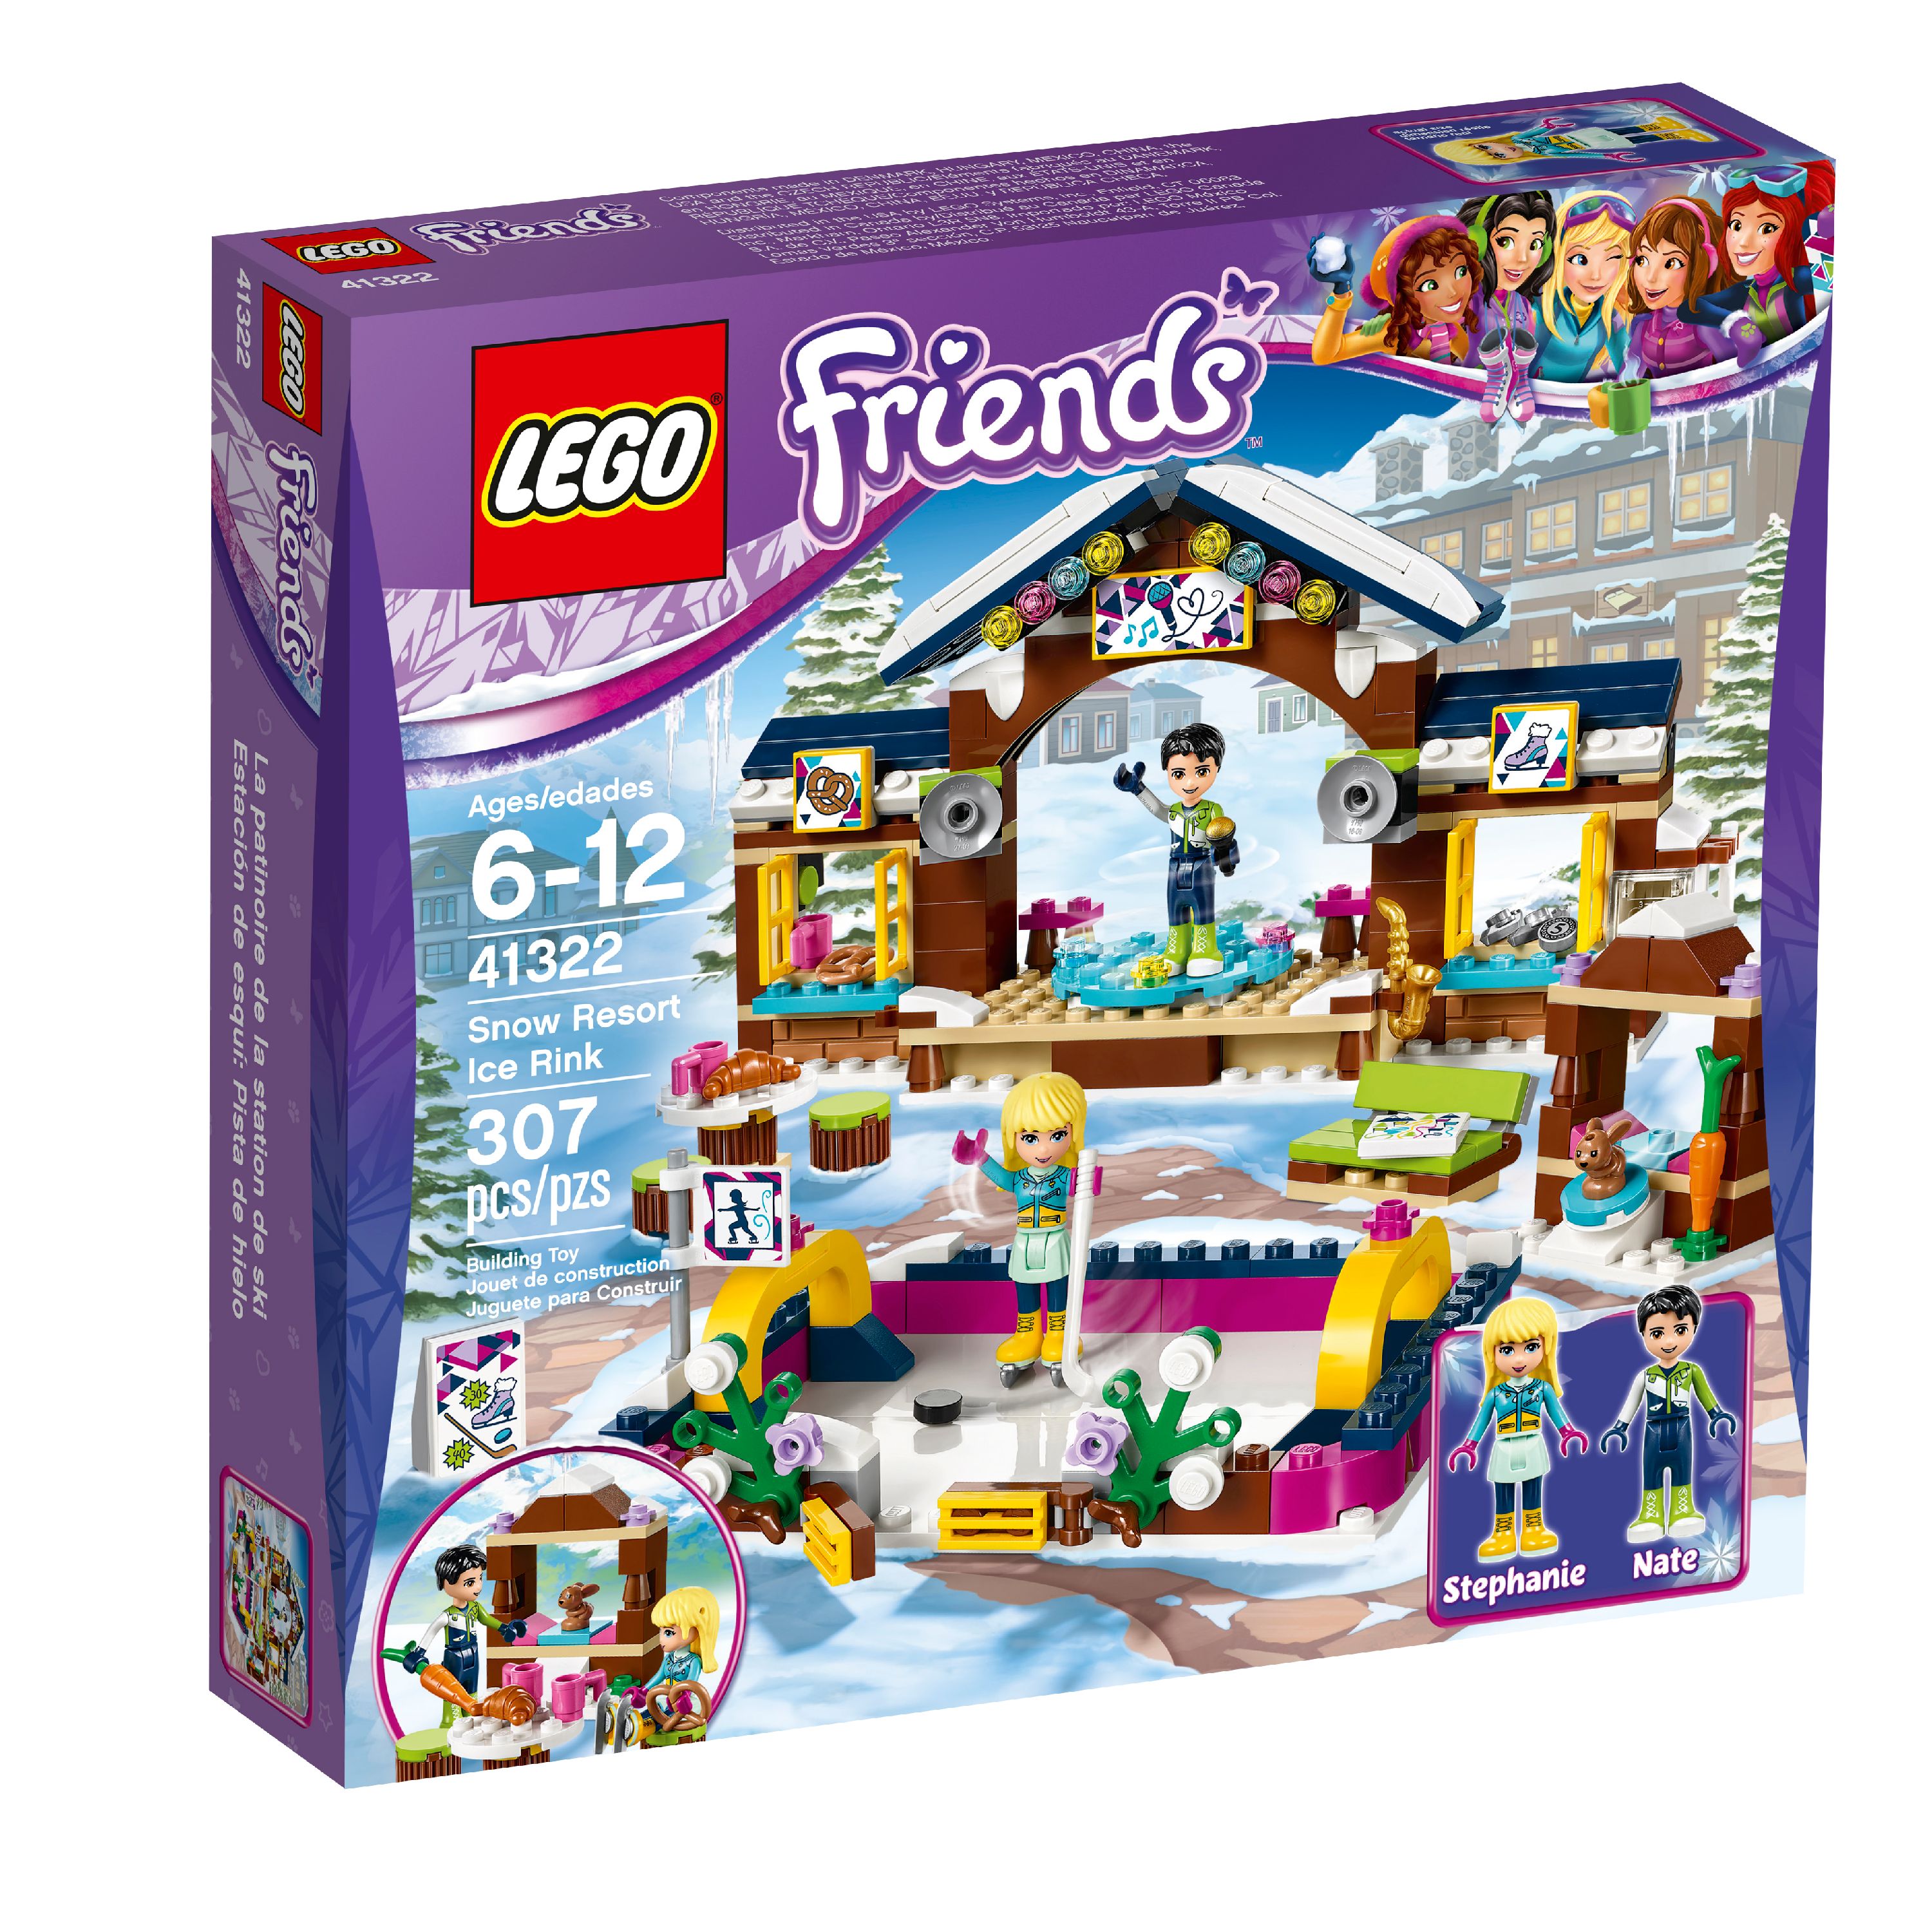 LEGO Friends Snow Resort Ice Rink 41322 (307 Pieces) - image 4 of 6